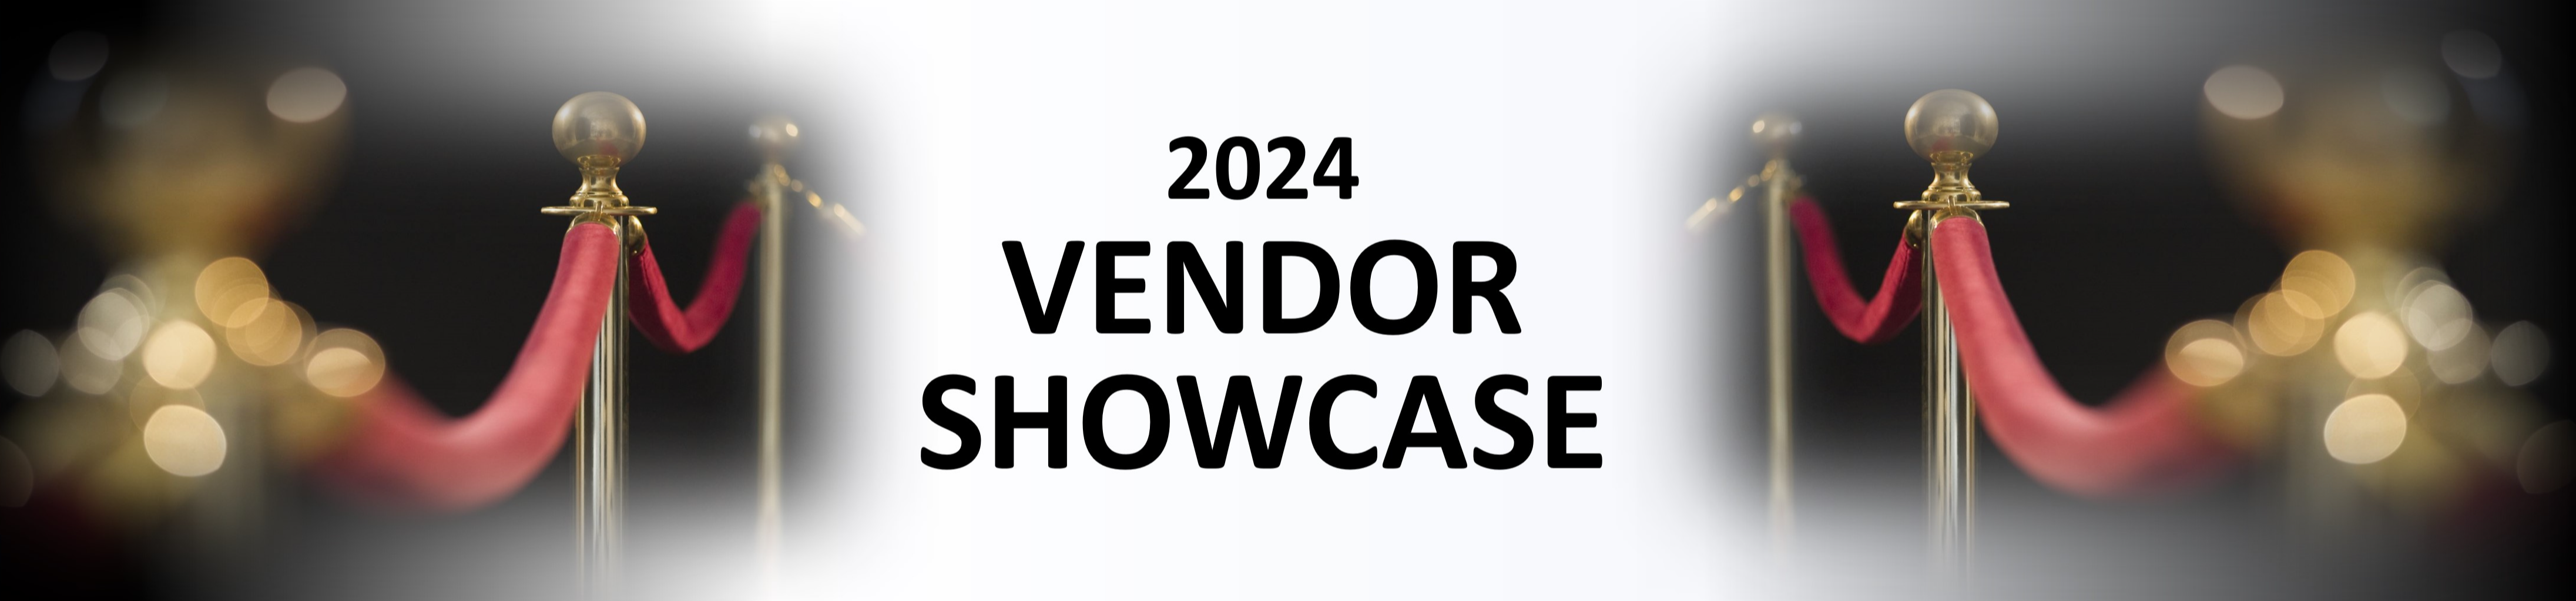 Vendor showcase text with two VIP rope barriers